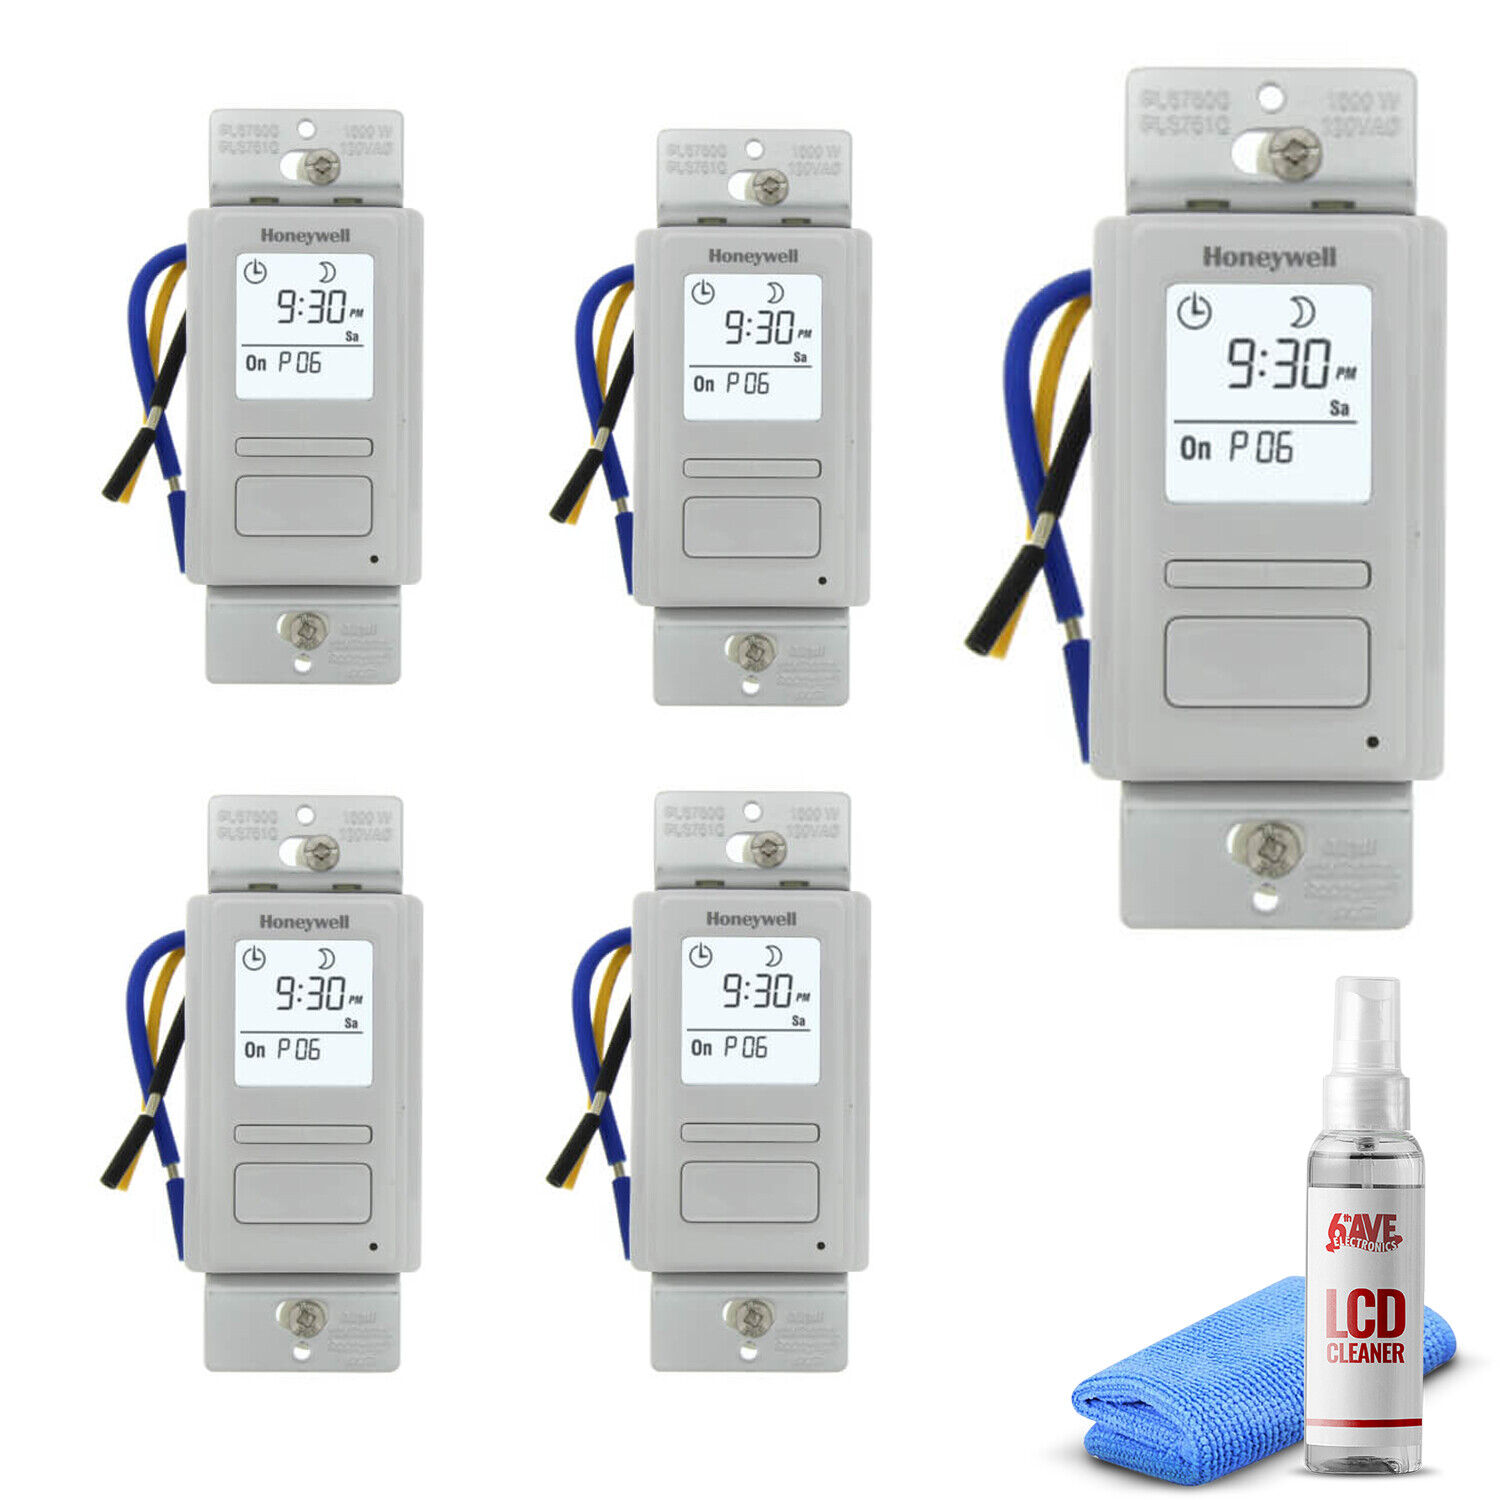 5-Pack Honeywell Timer Switch with Sunrise Sunset Single or 3 Way + LCD Cleaner